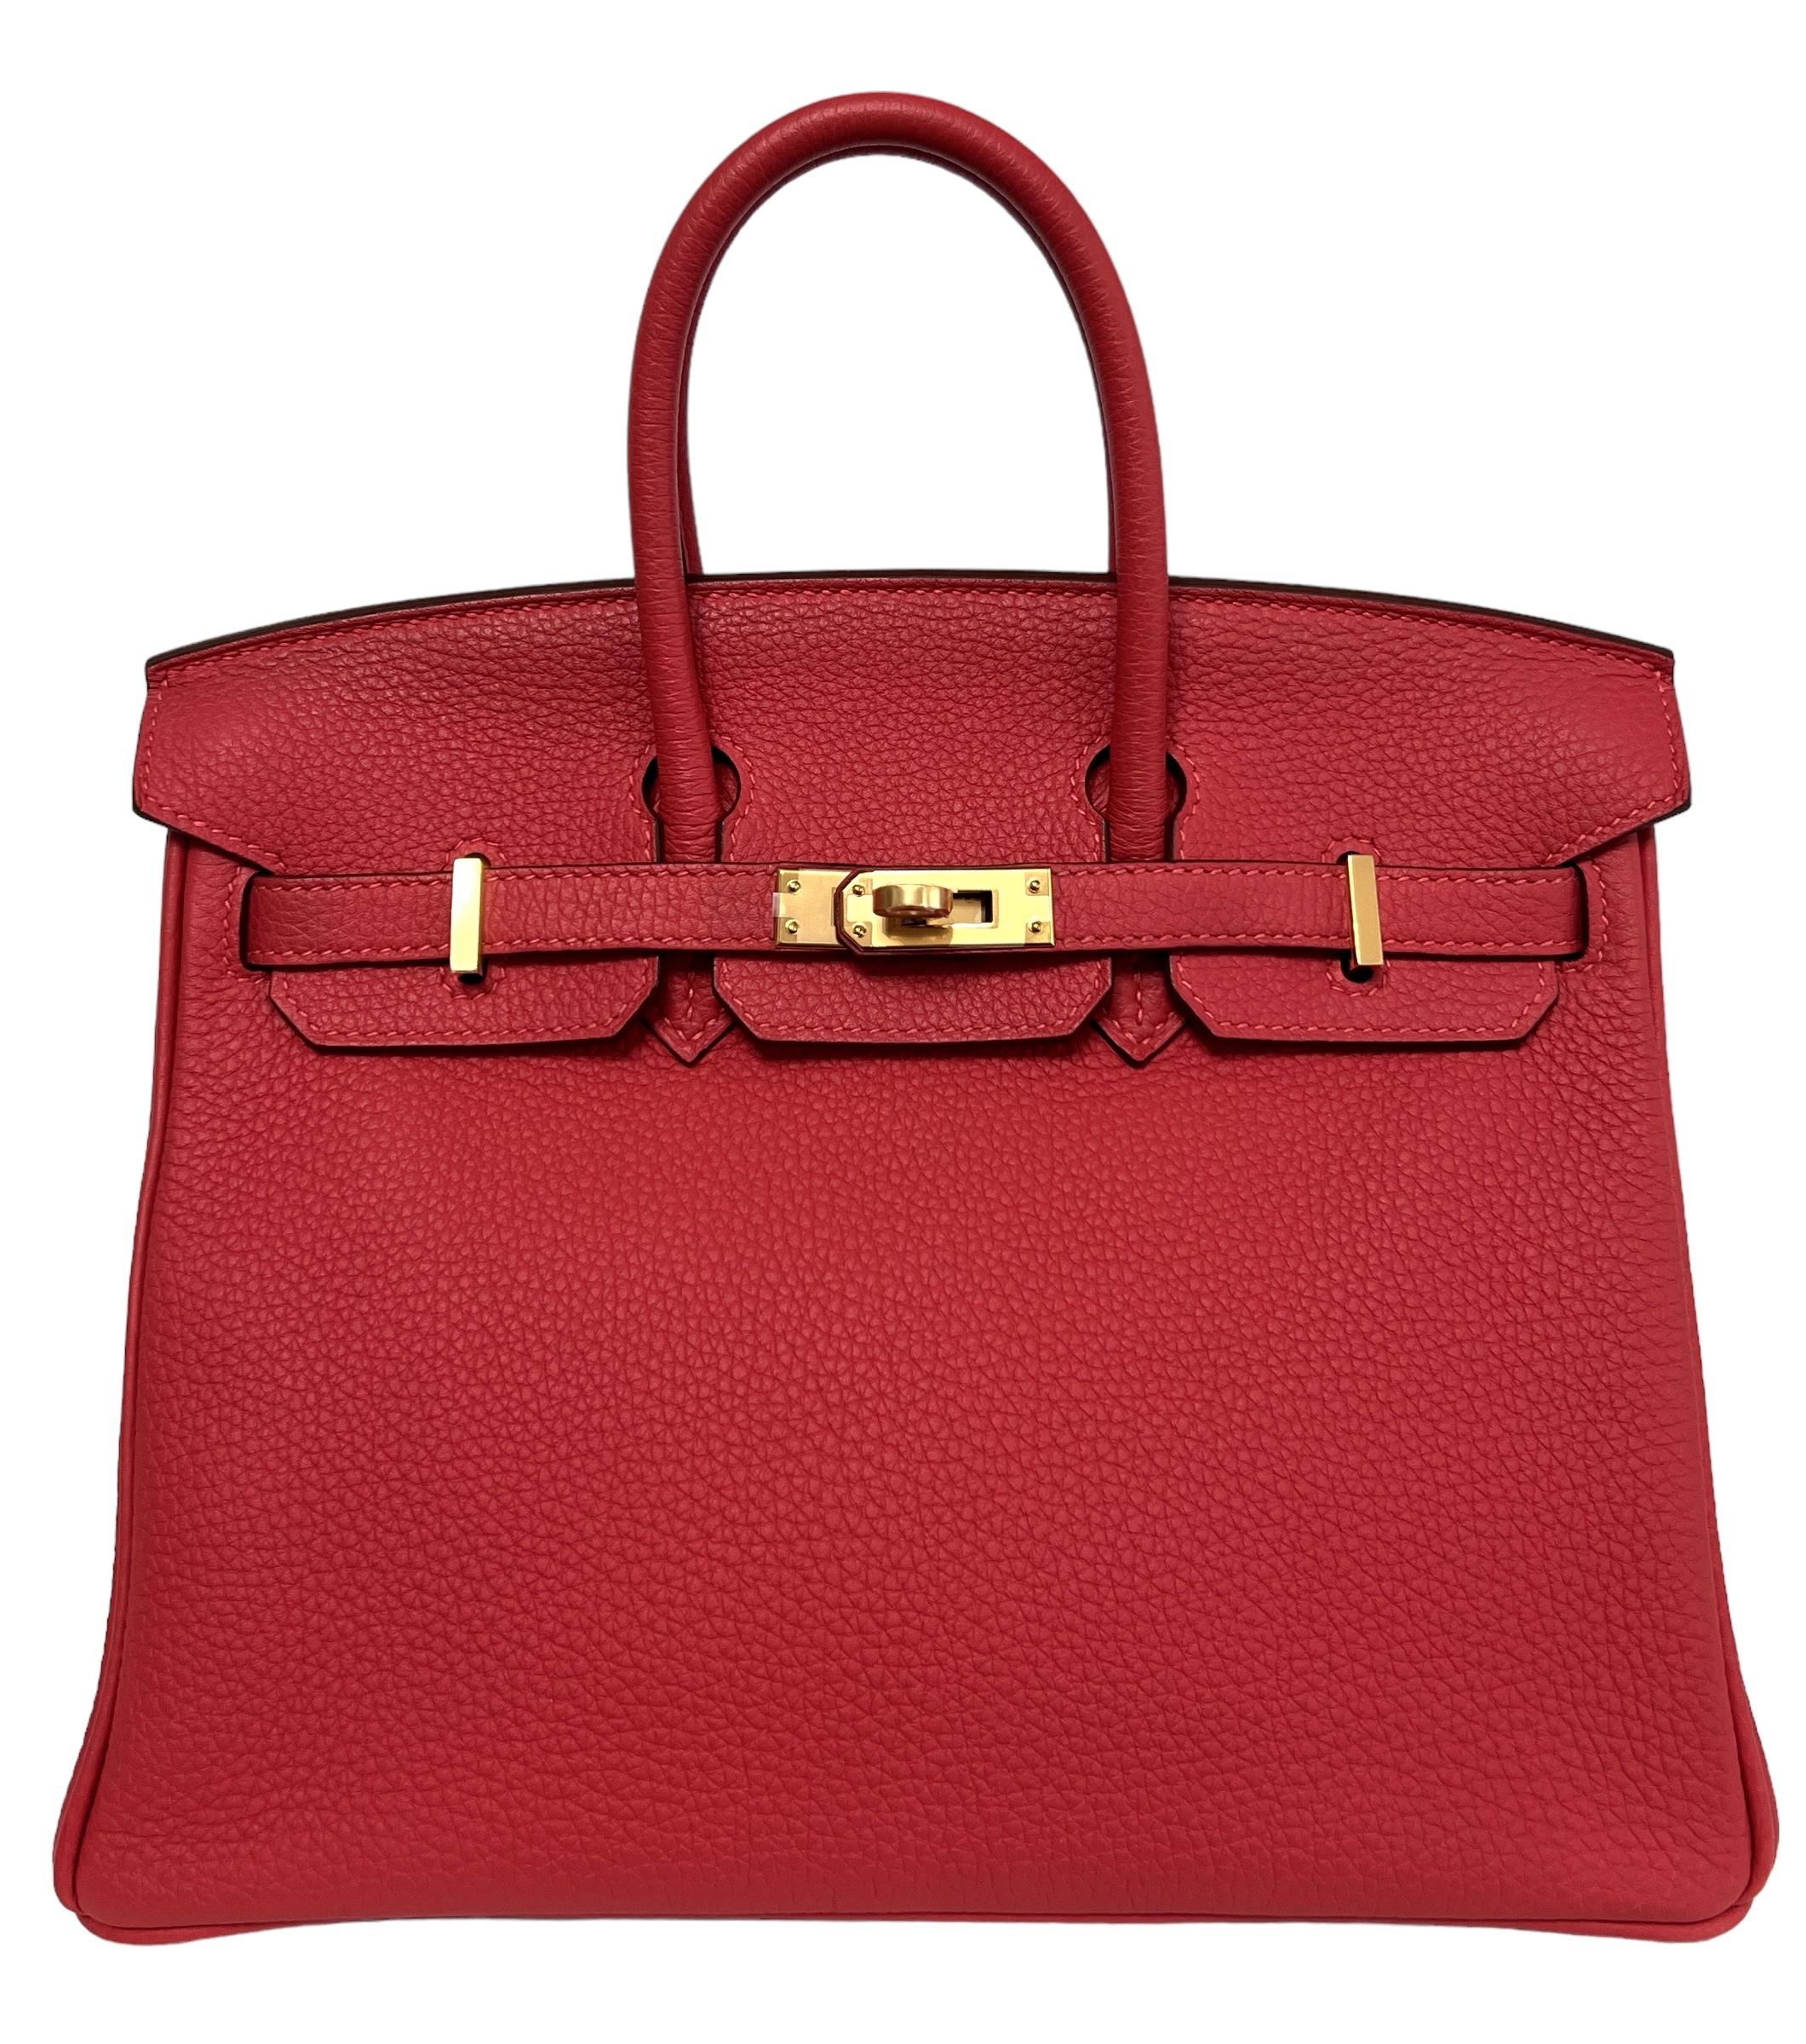 Absolutely Stunning Pristine Hermes Birkin 25 Bougainvillea Togo Leather complimented by Gold Hardware. Excellent Pristine Condition Plastic on Hardware, excellent structure and corners. C Stamp 2018. 

Please keep in mind that this is a pre owned